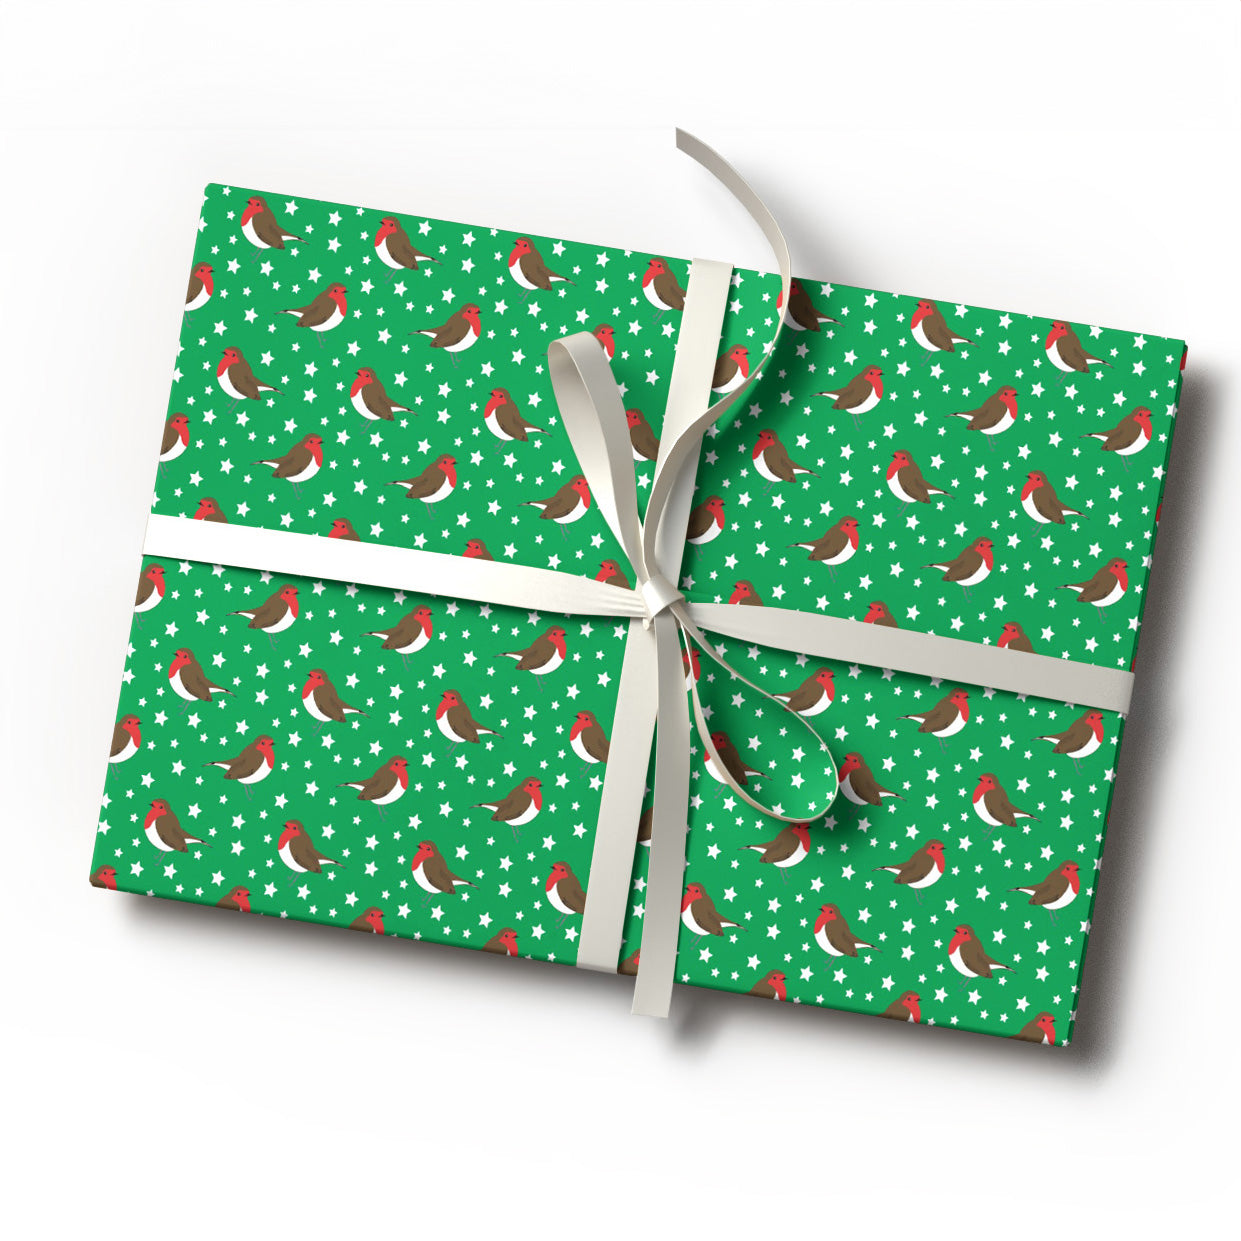 Green Robins wrapping paper from UmmPixies